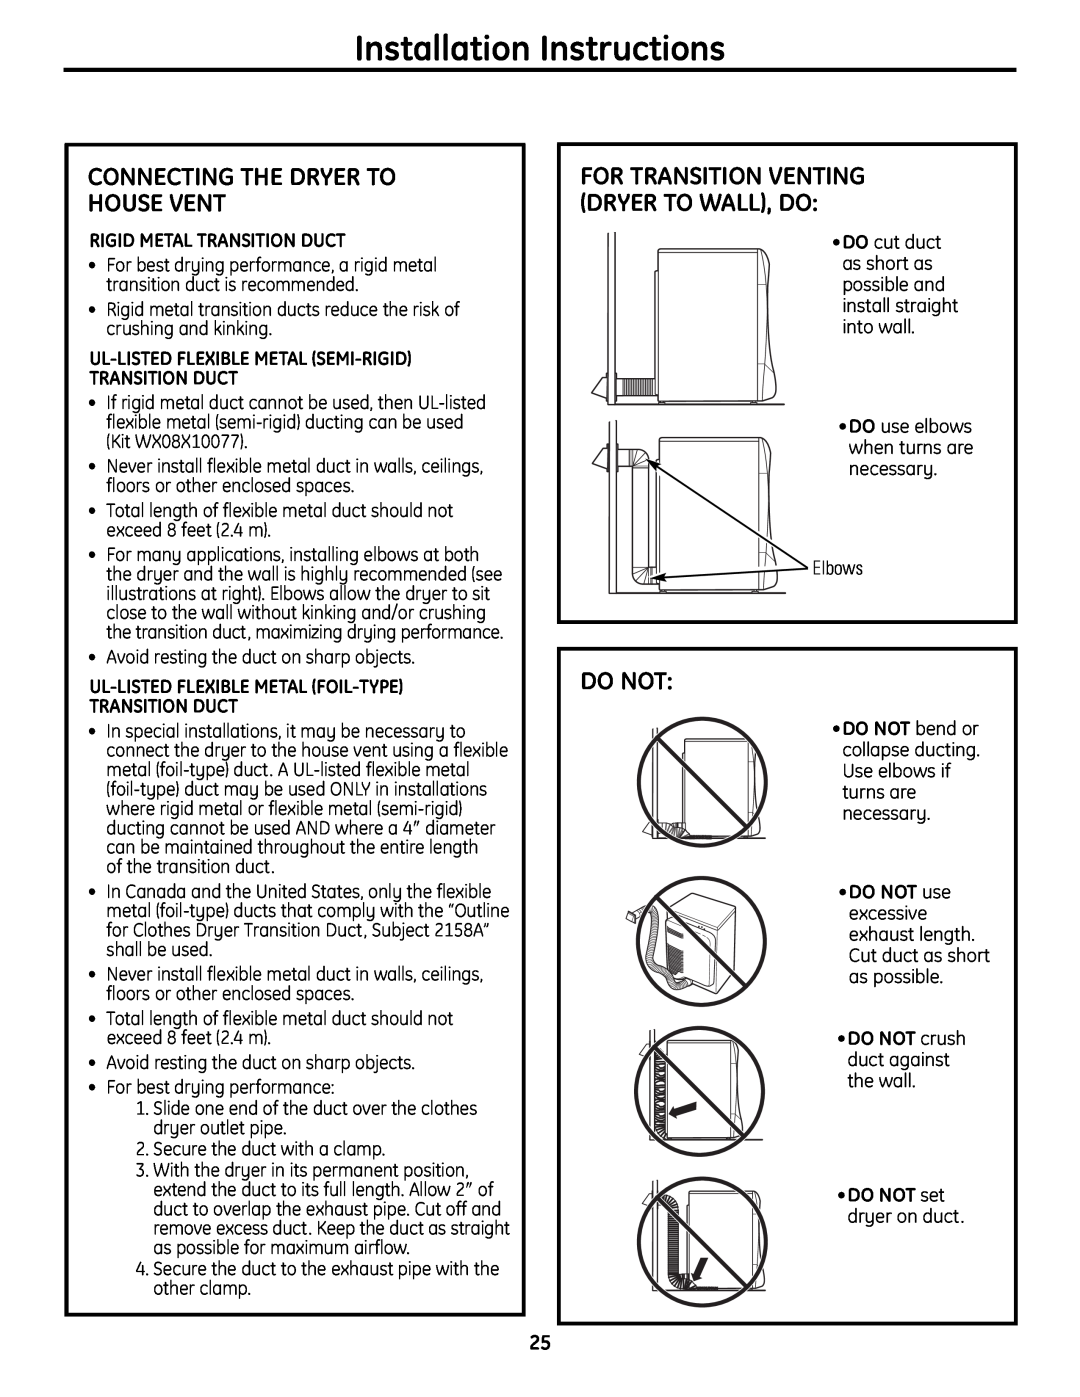 GE UPVH890 Connecting The Dryer To House Vent, Do Not, Installation Instructions, Rigid Metal Transition Duct 